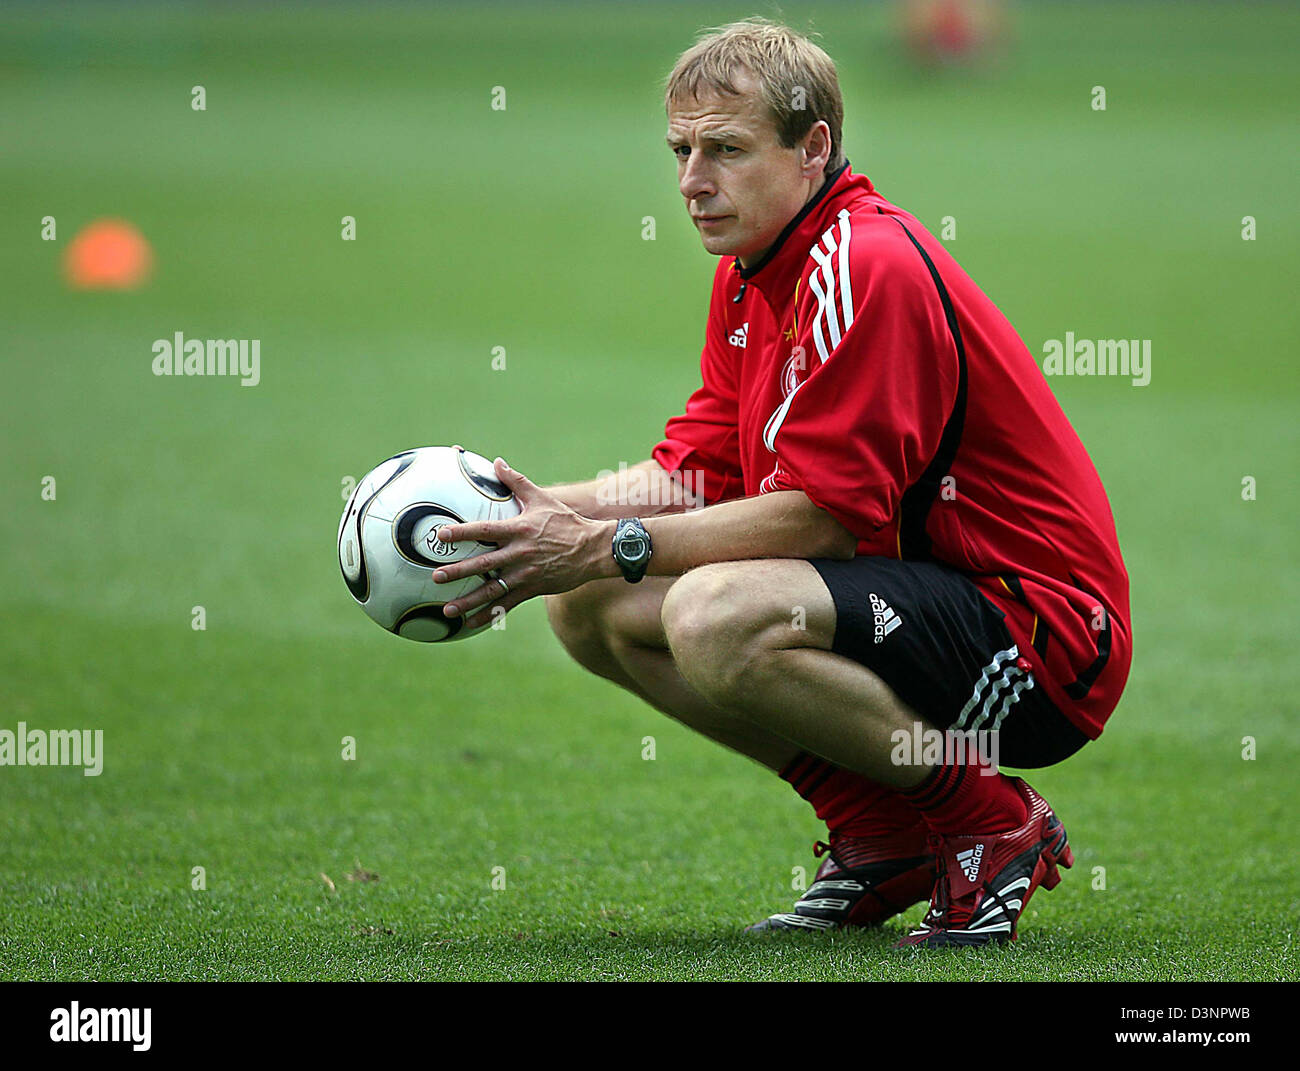 Germany's team coach Juergen Klinsmann watches the players during the training session in Berlin, Monday, 19 June 2006. The German national soccer team prepares for the third group A match against Ecuador on Tuesday, 20 June 2006, in Berlin. Photo: OLIVER BERG Stock Photo